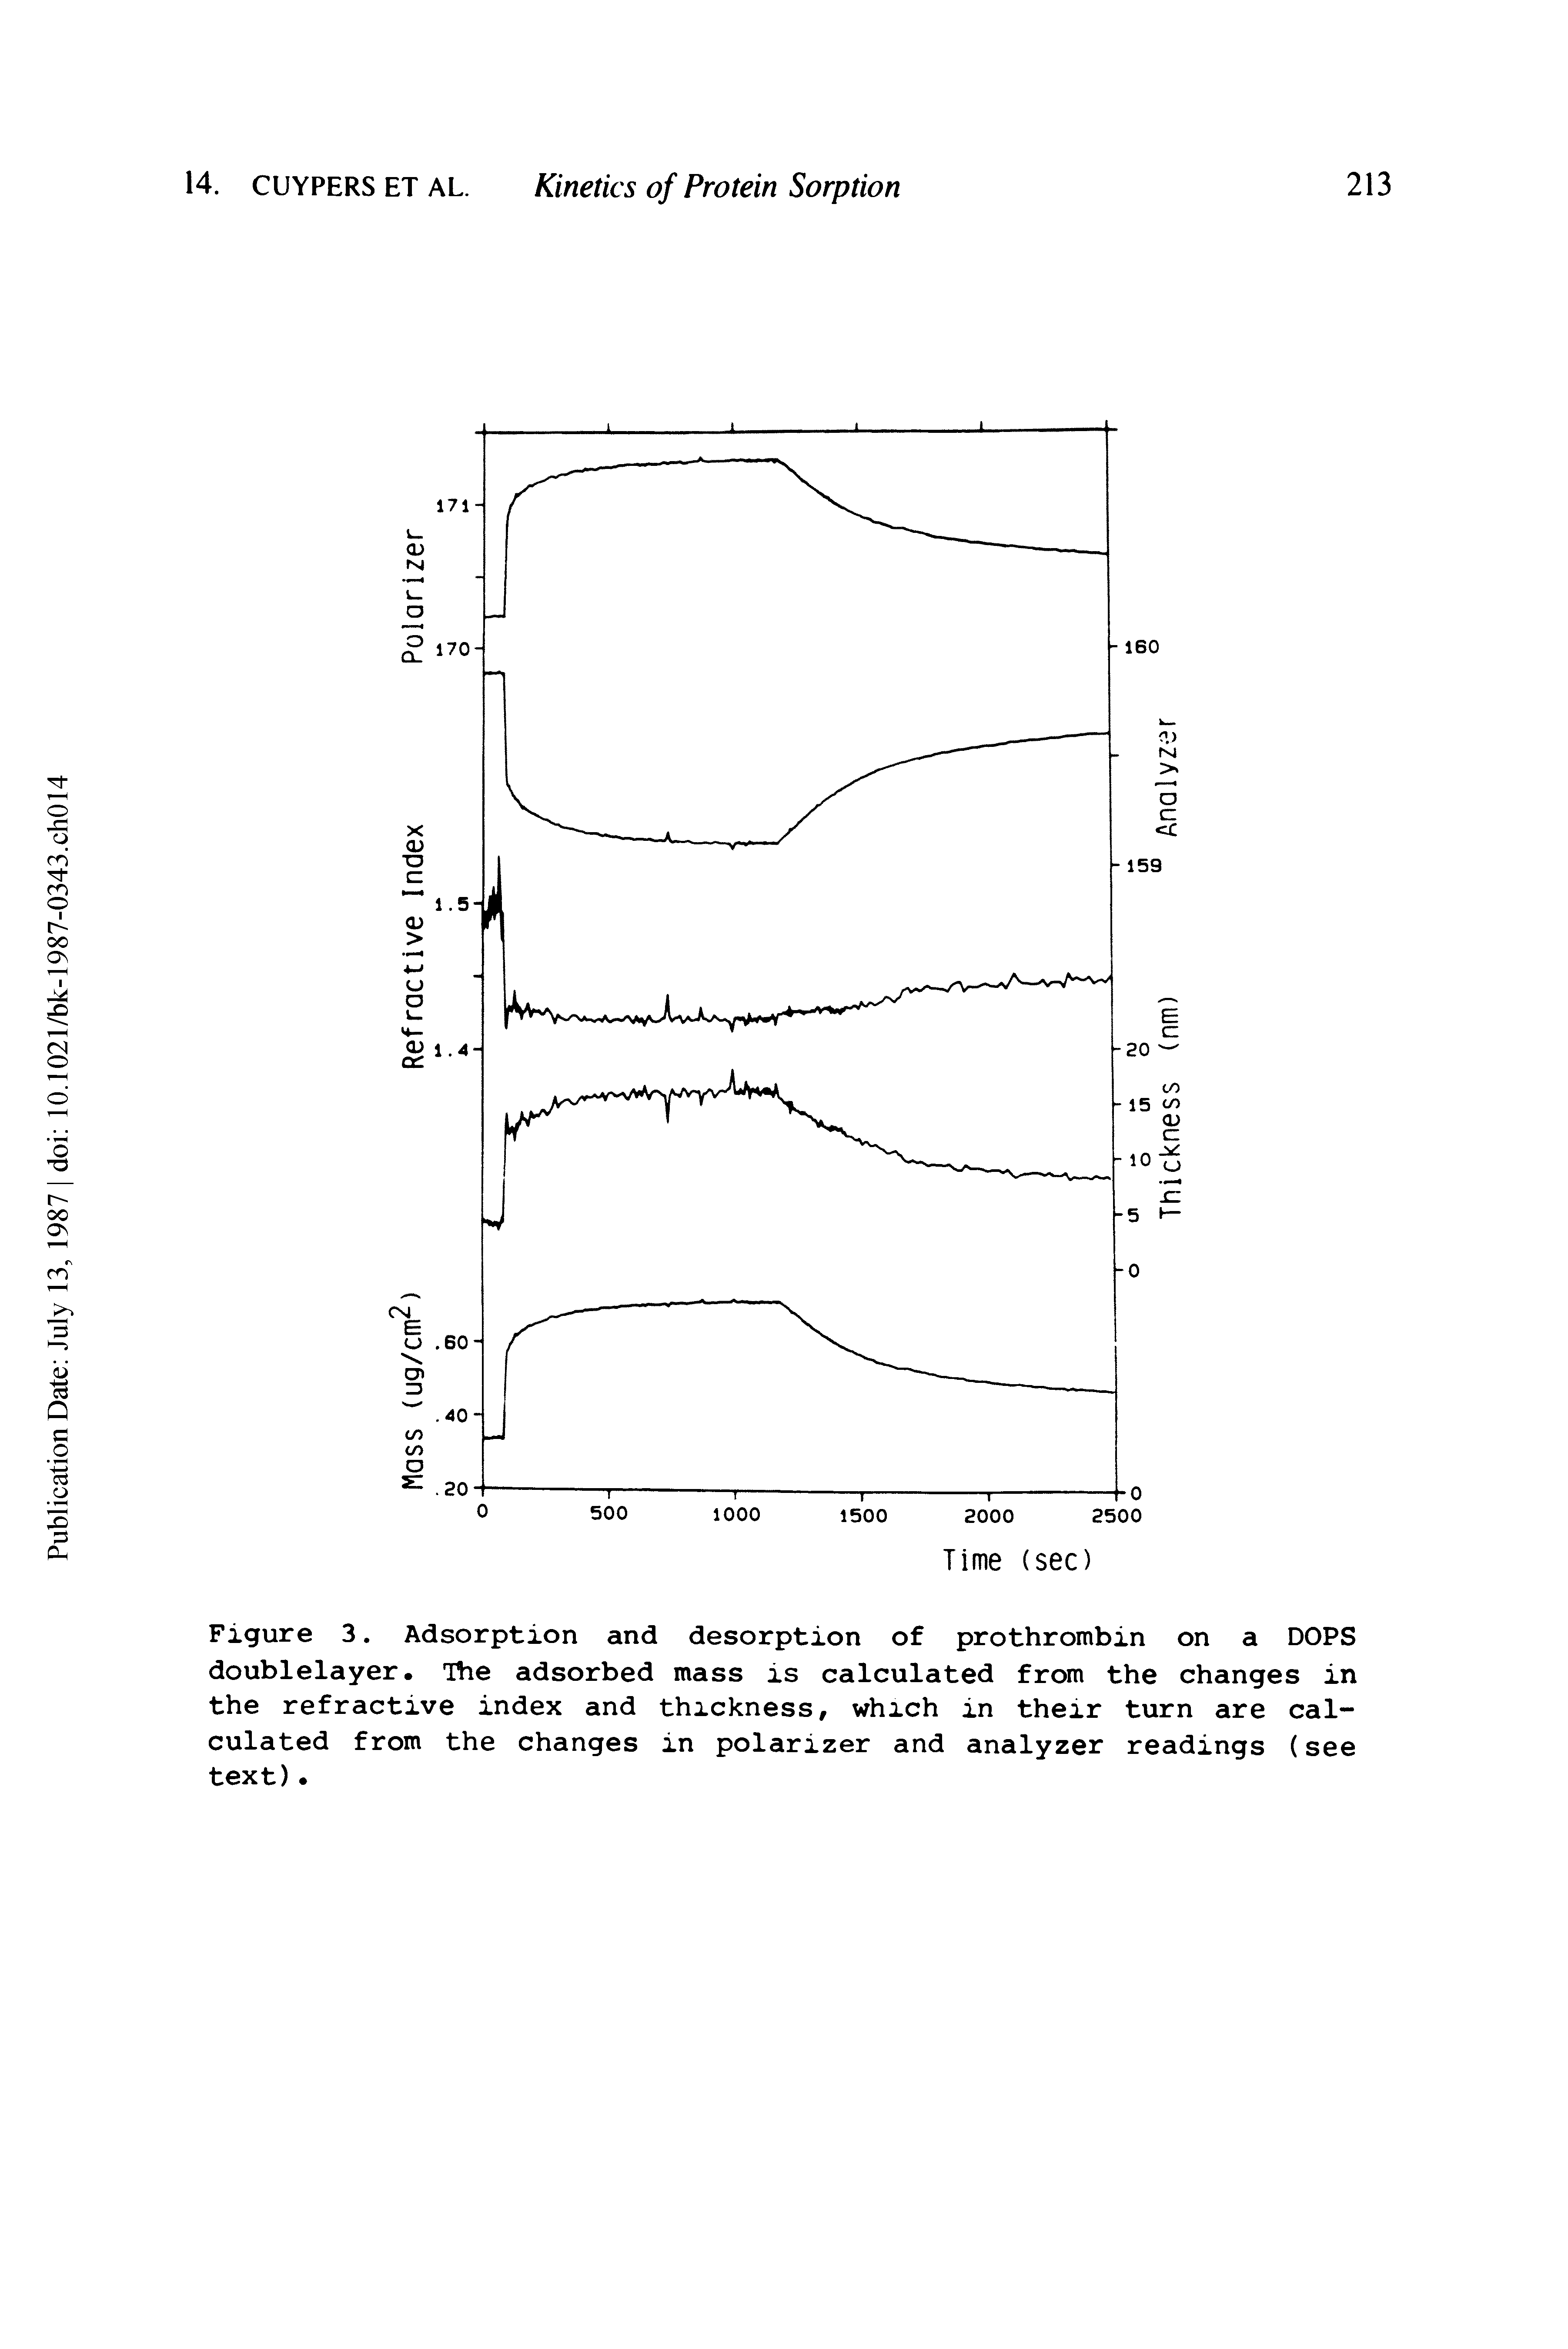 Figure 3. Adsorption and desorption of prothrombin on a DOPS doublelayer. The adsorbed mass is calculated from the changes in the refractive index and thickness, which in their turn are calculated from the changes in polarizer and analyzer readings (see text) ...